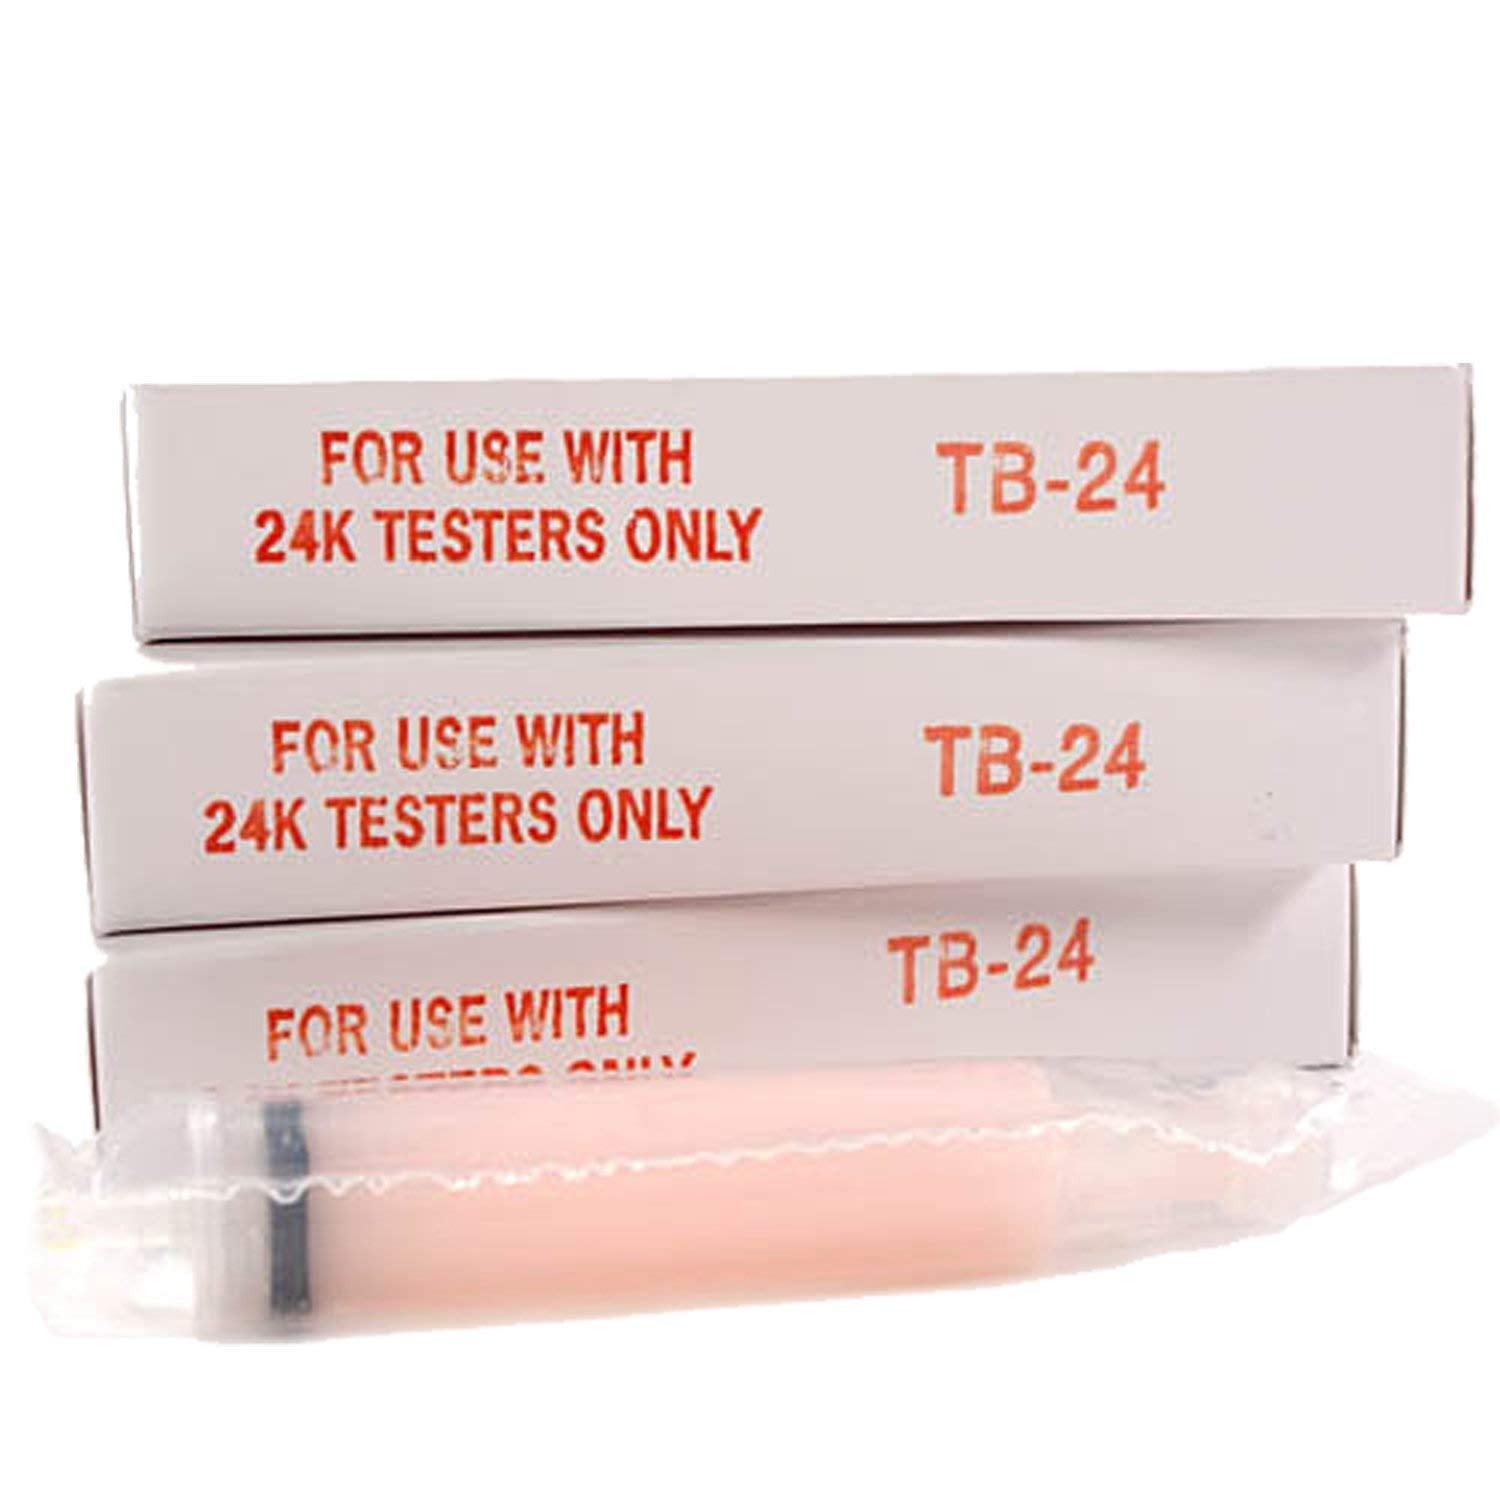 Gold Tester Gold Testers - RS Mizar - Tri Electronics GXL-24 GT-4000 ET18  M24 Gold Testers - gold tester